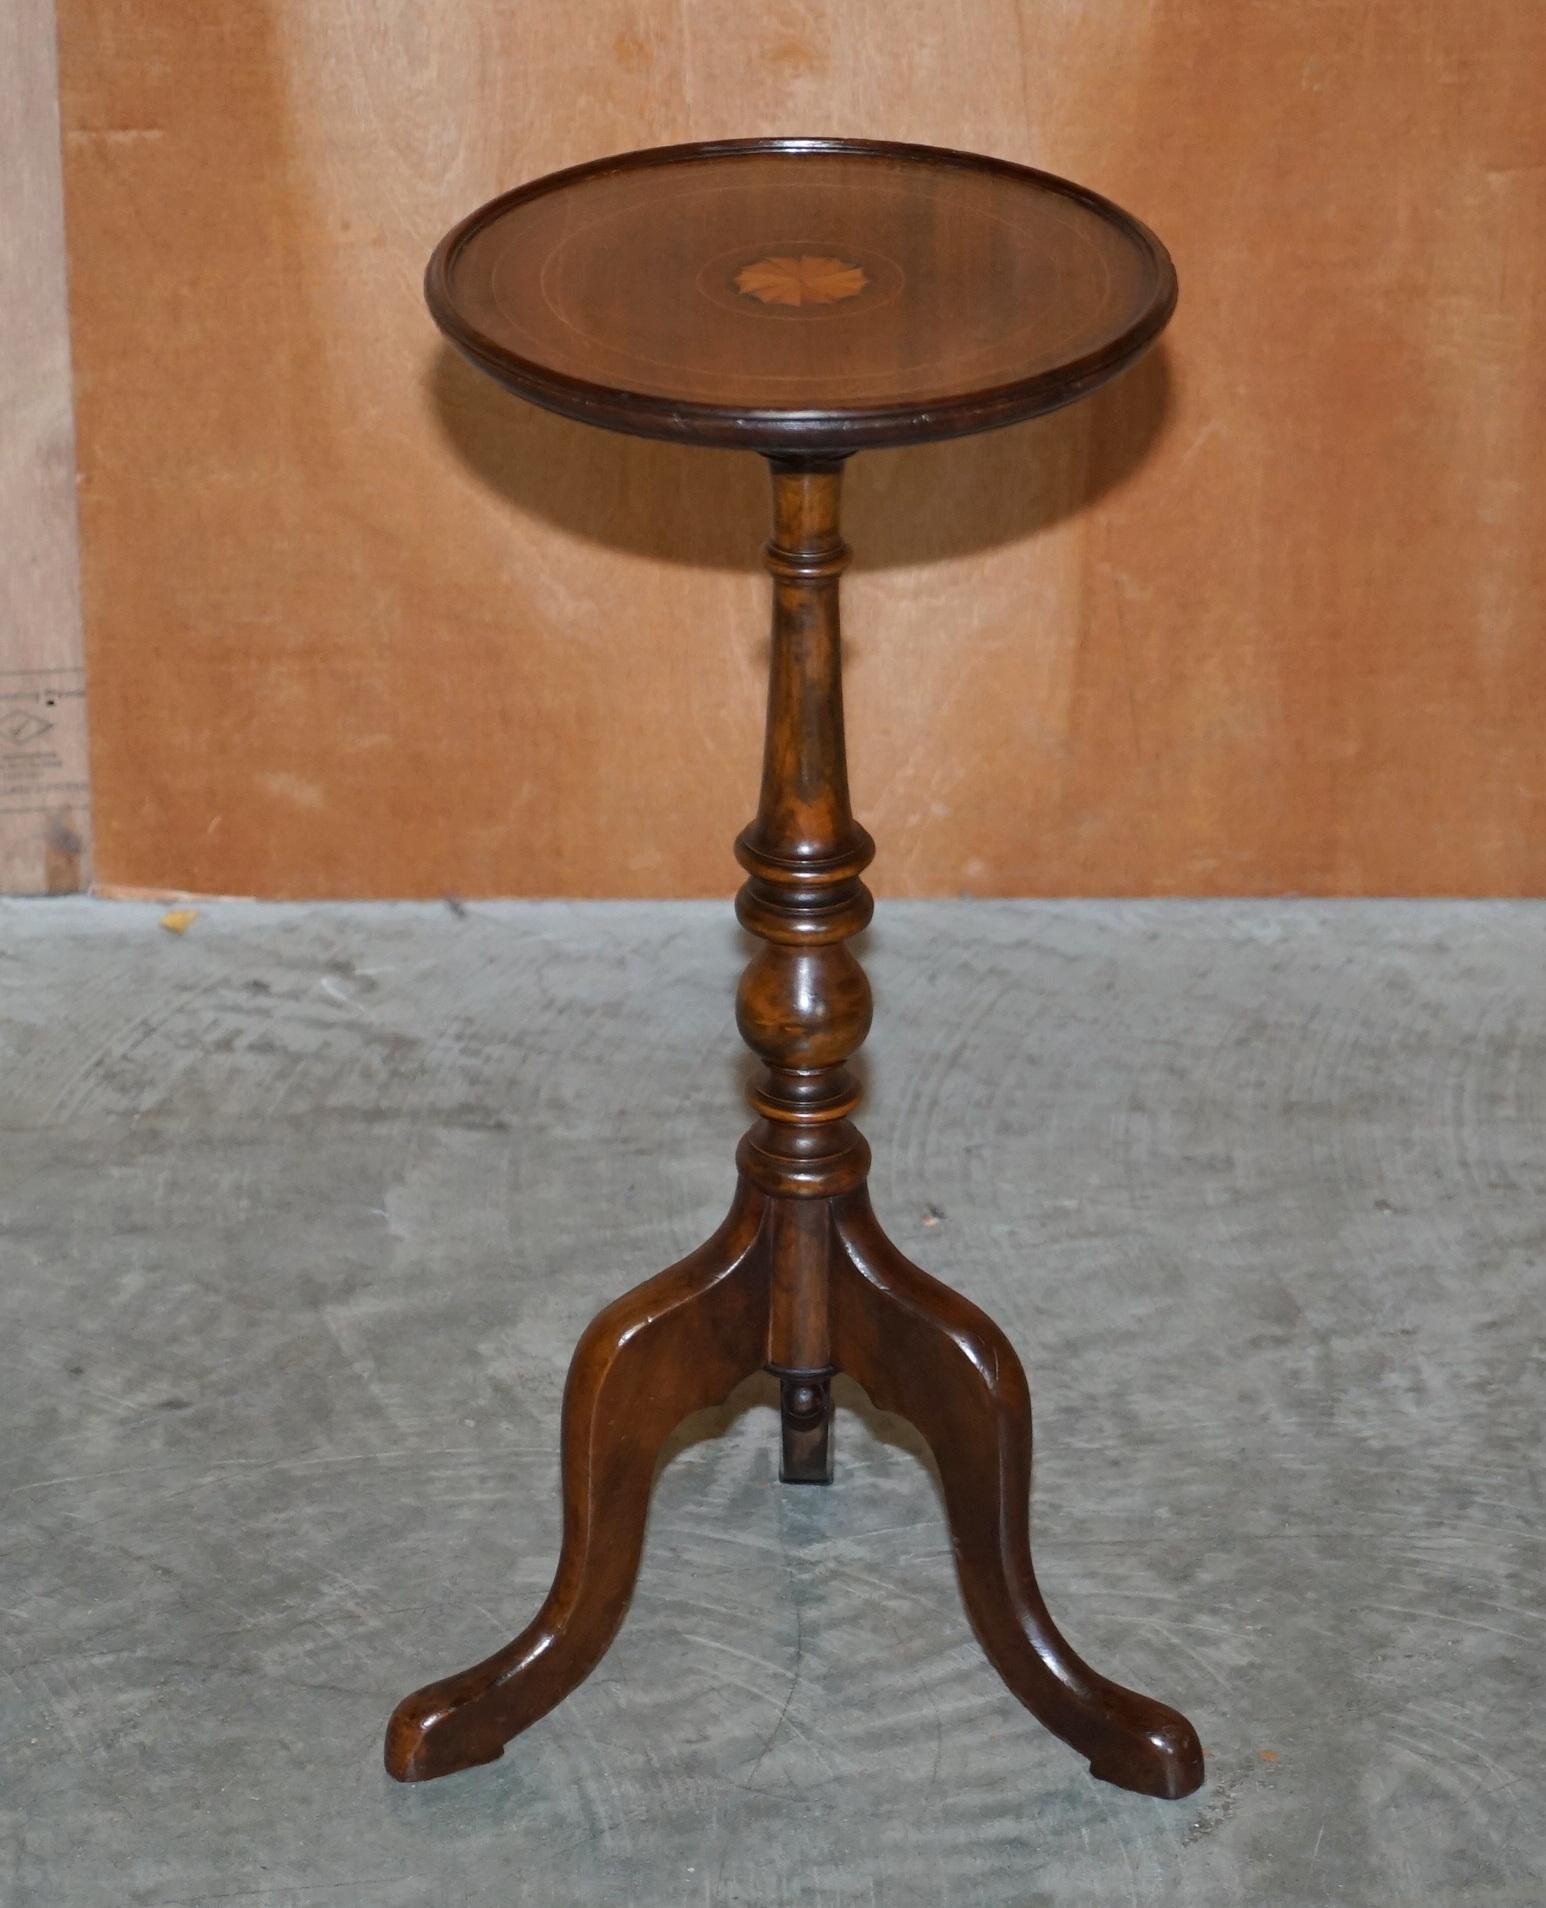 We are delighted to offer for sale this lovely Sheraton Revival tripod table 

A very good looking well made and decorative piece, it sits well in any setting and is very unitarian. The piece has the Sheraton revival inlay to the top, its vintage,